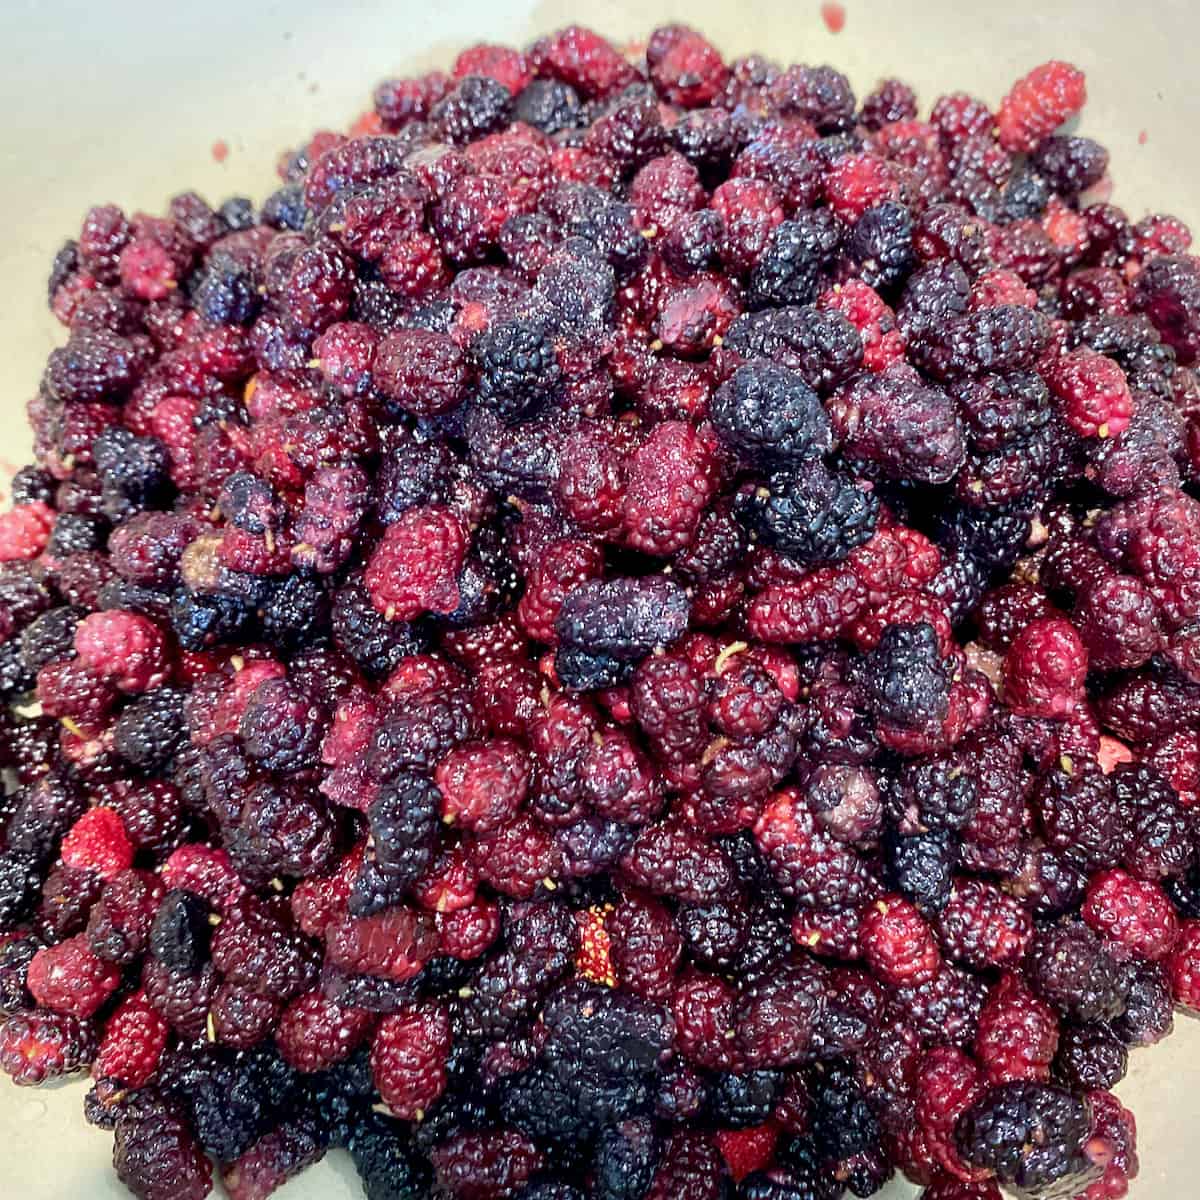 Jam it out with a bowl of fresh mulberries.